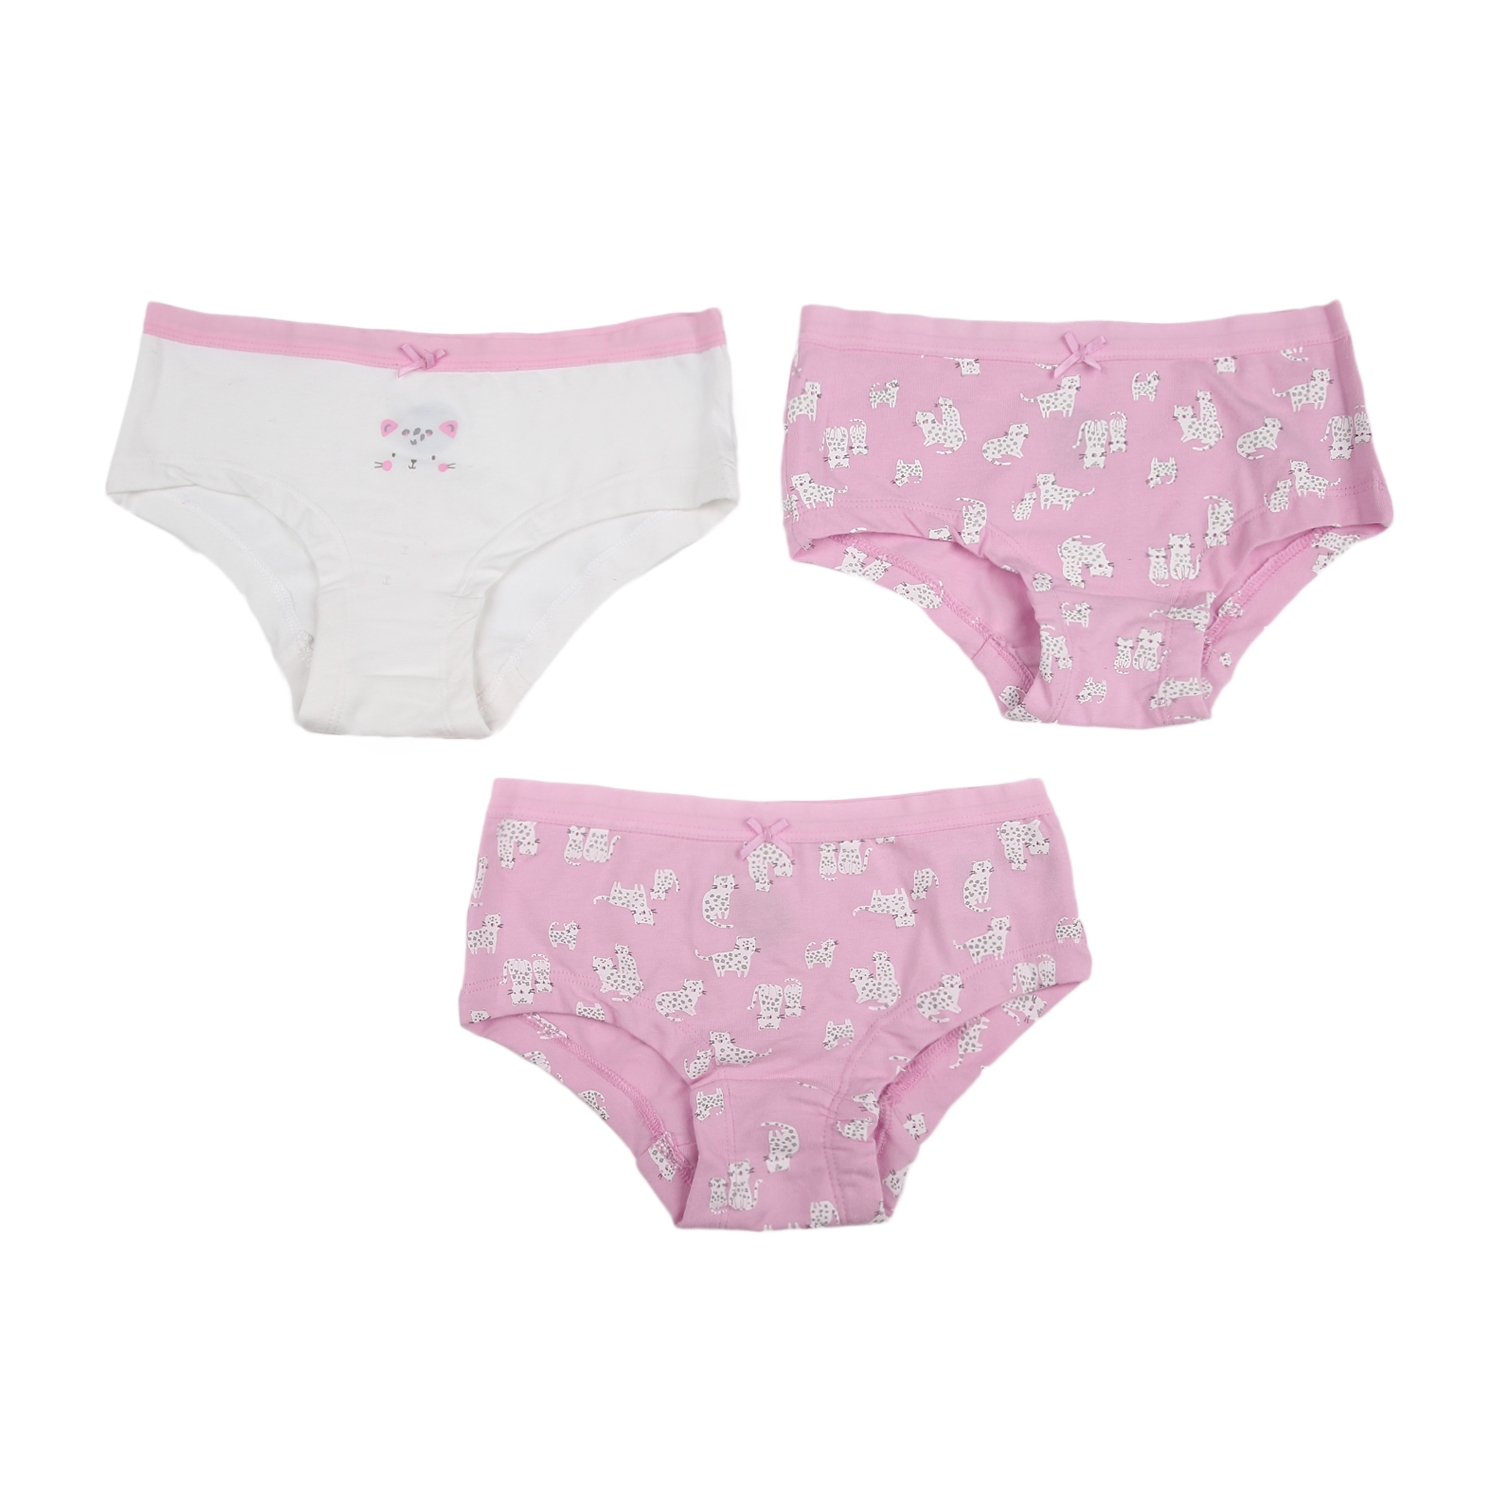 Girls Printed Briefs - Pack of 3 - Pink white